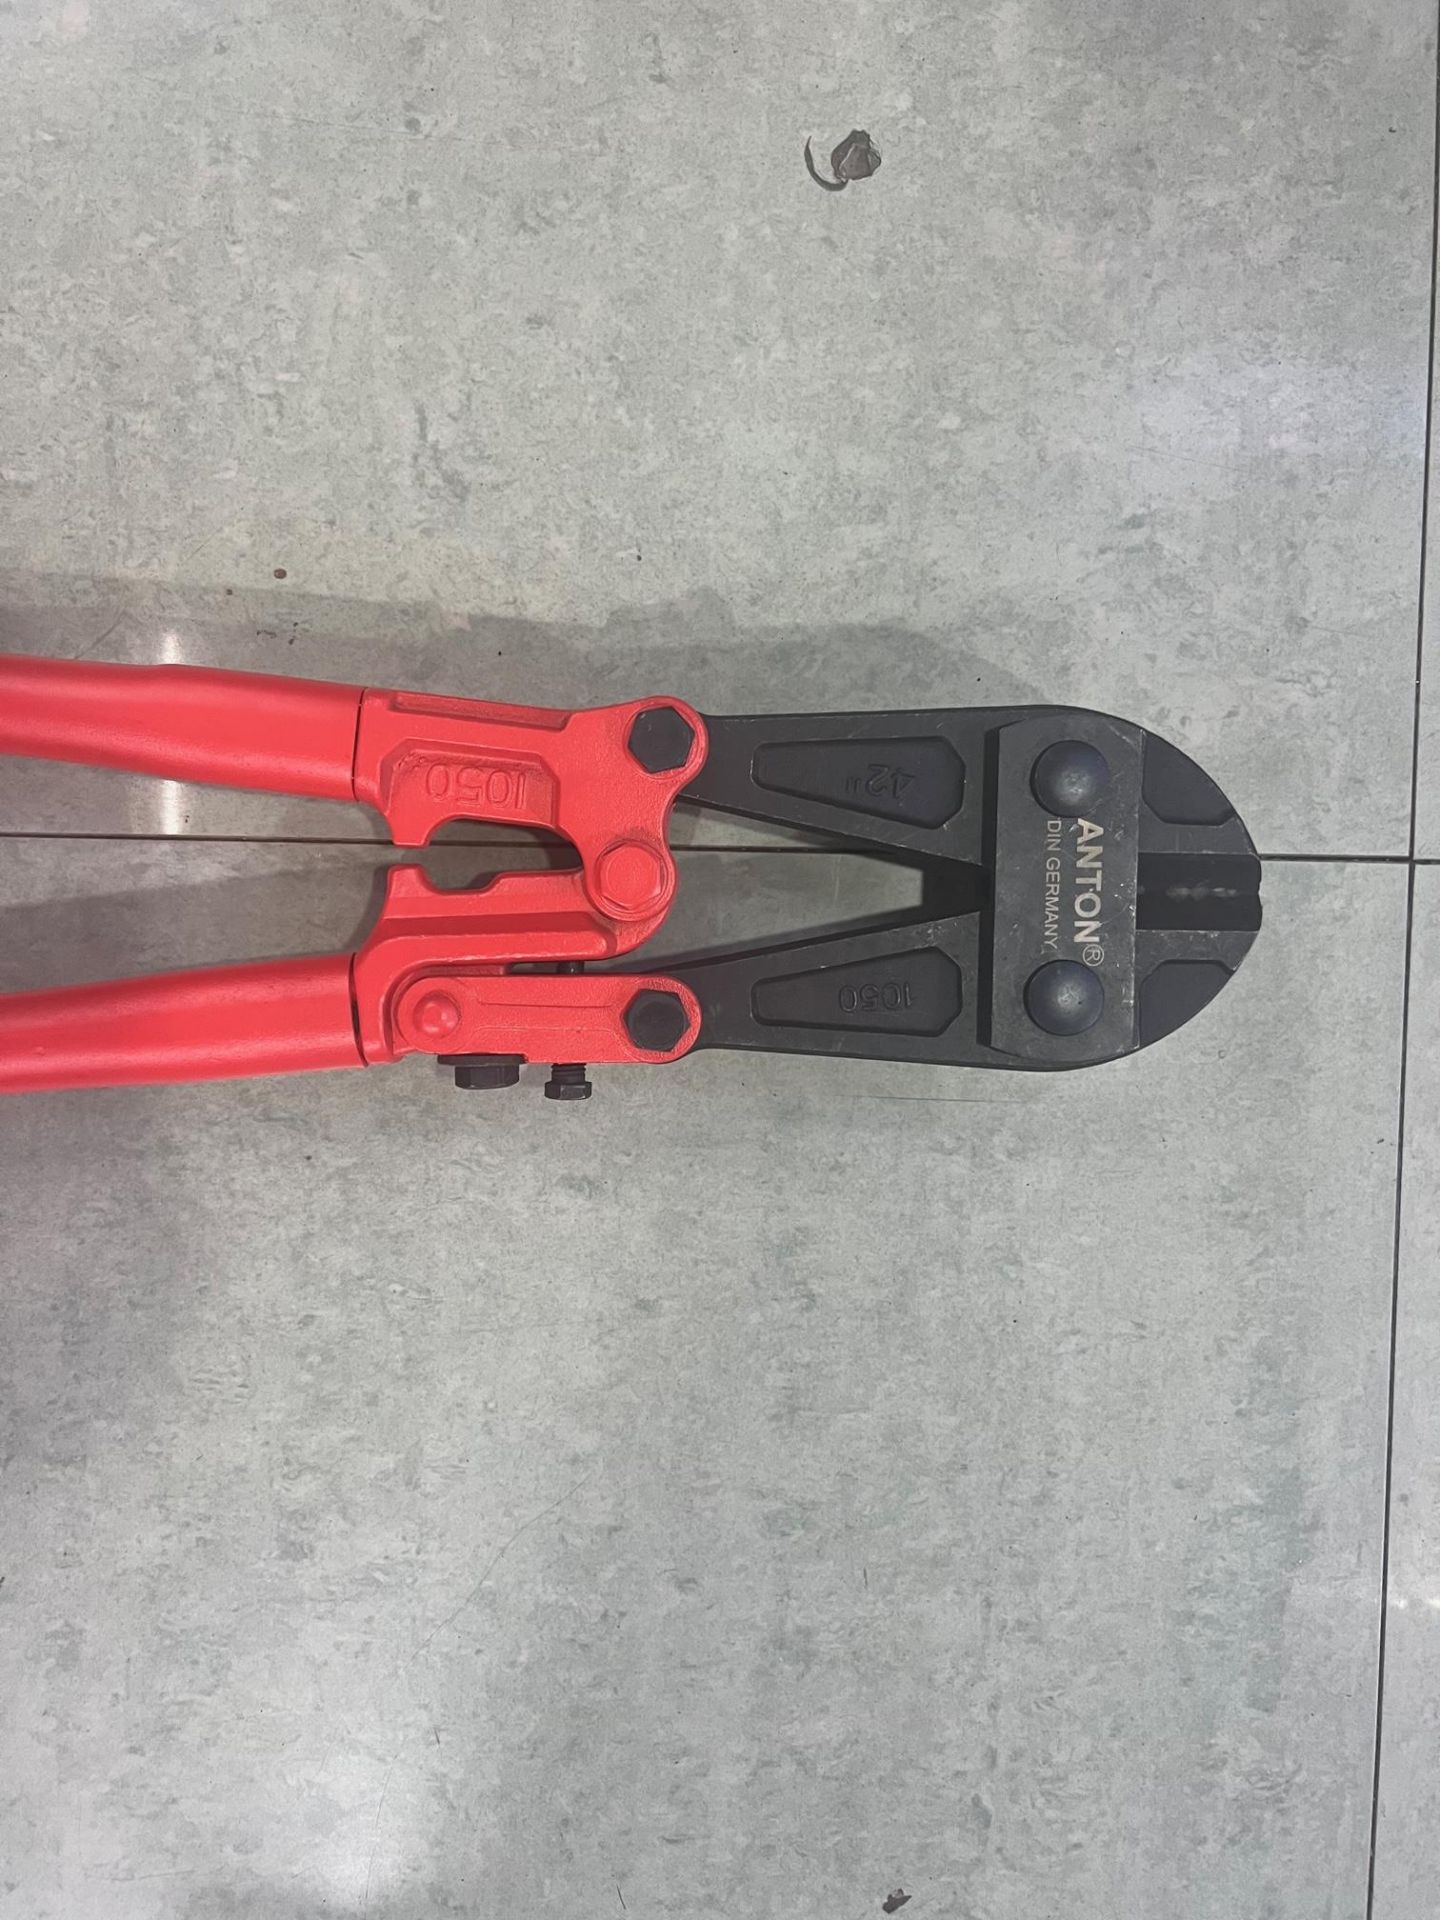 NEW 42INCH HEAVY DUTY BOLT CUTTER - Image 2 of 2